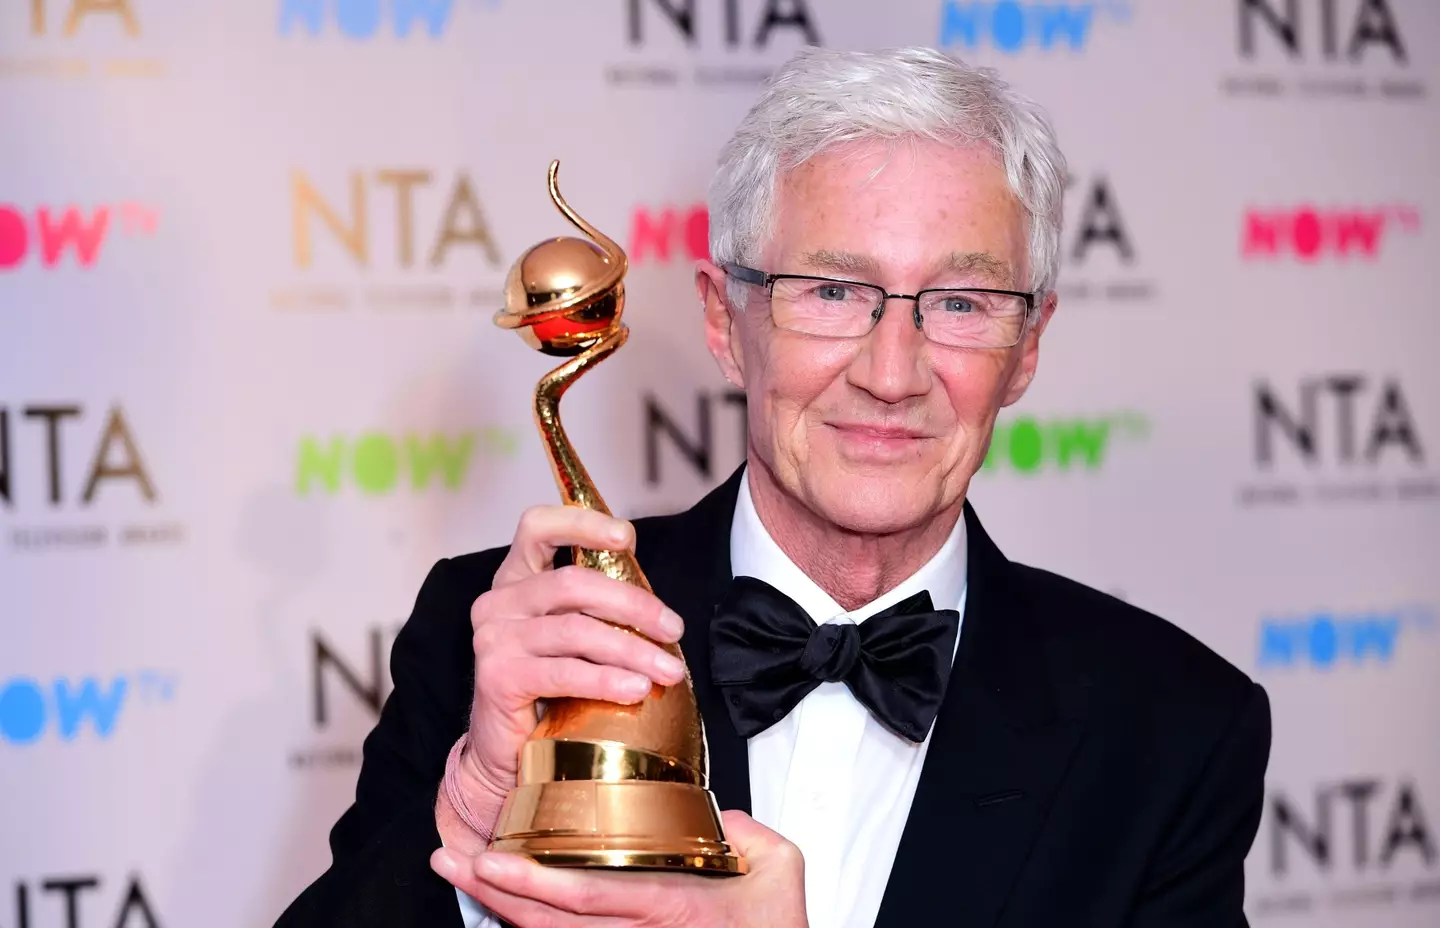 Paul O'Grady tragically passed away at the age of 67 in March.